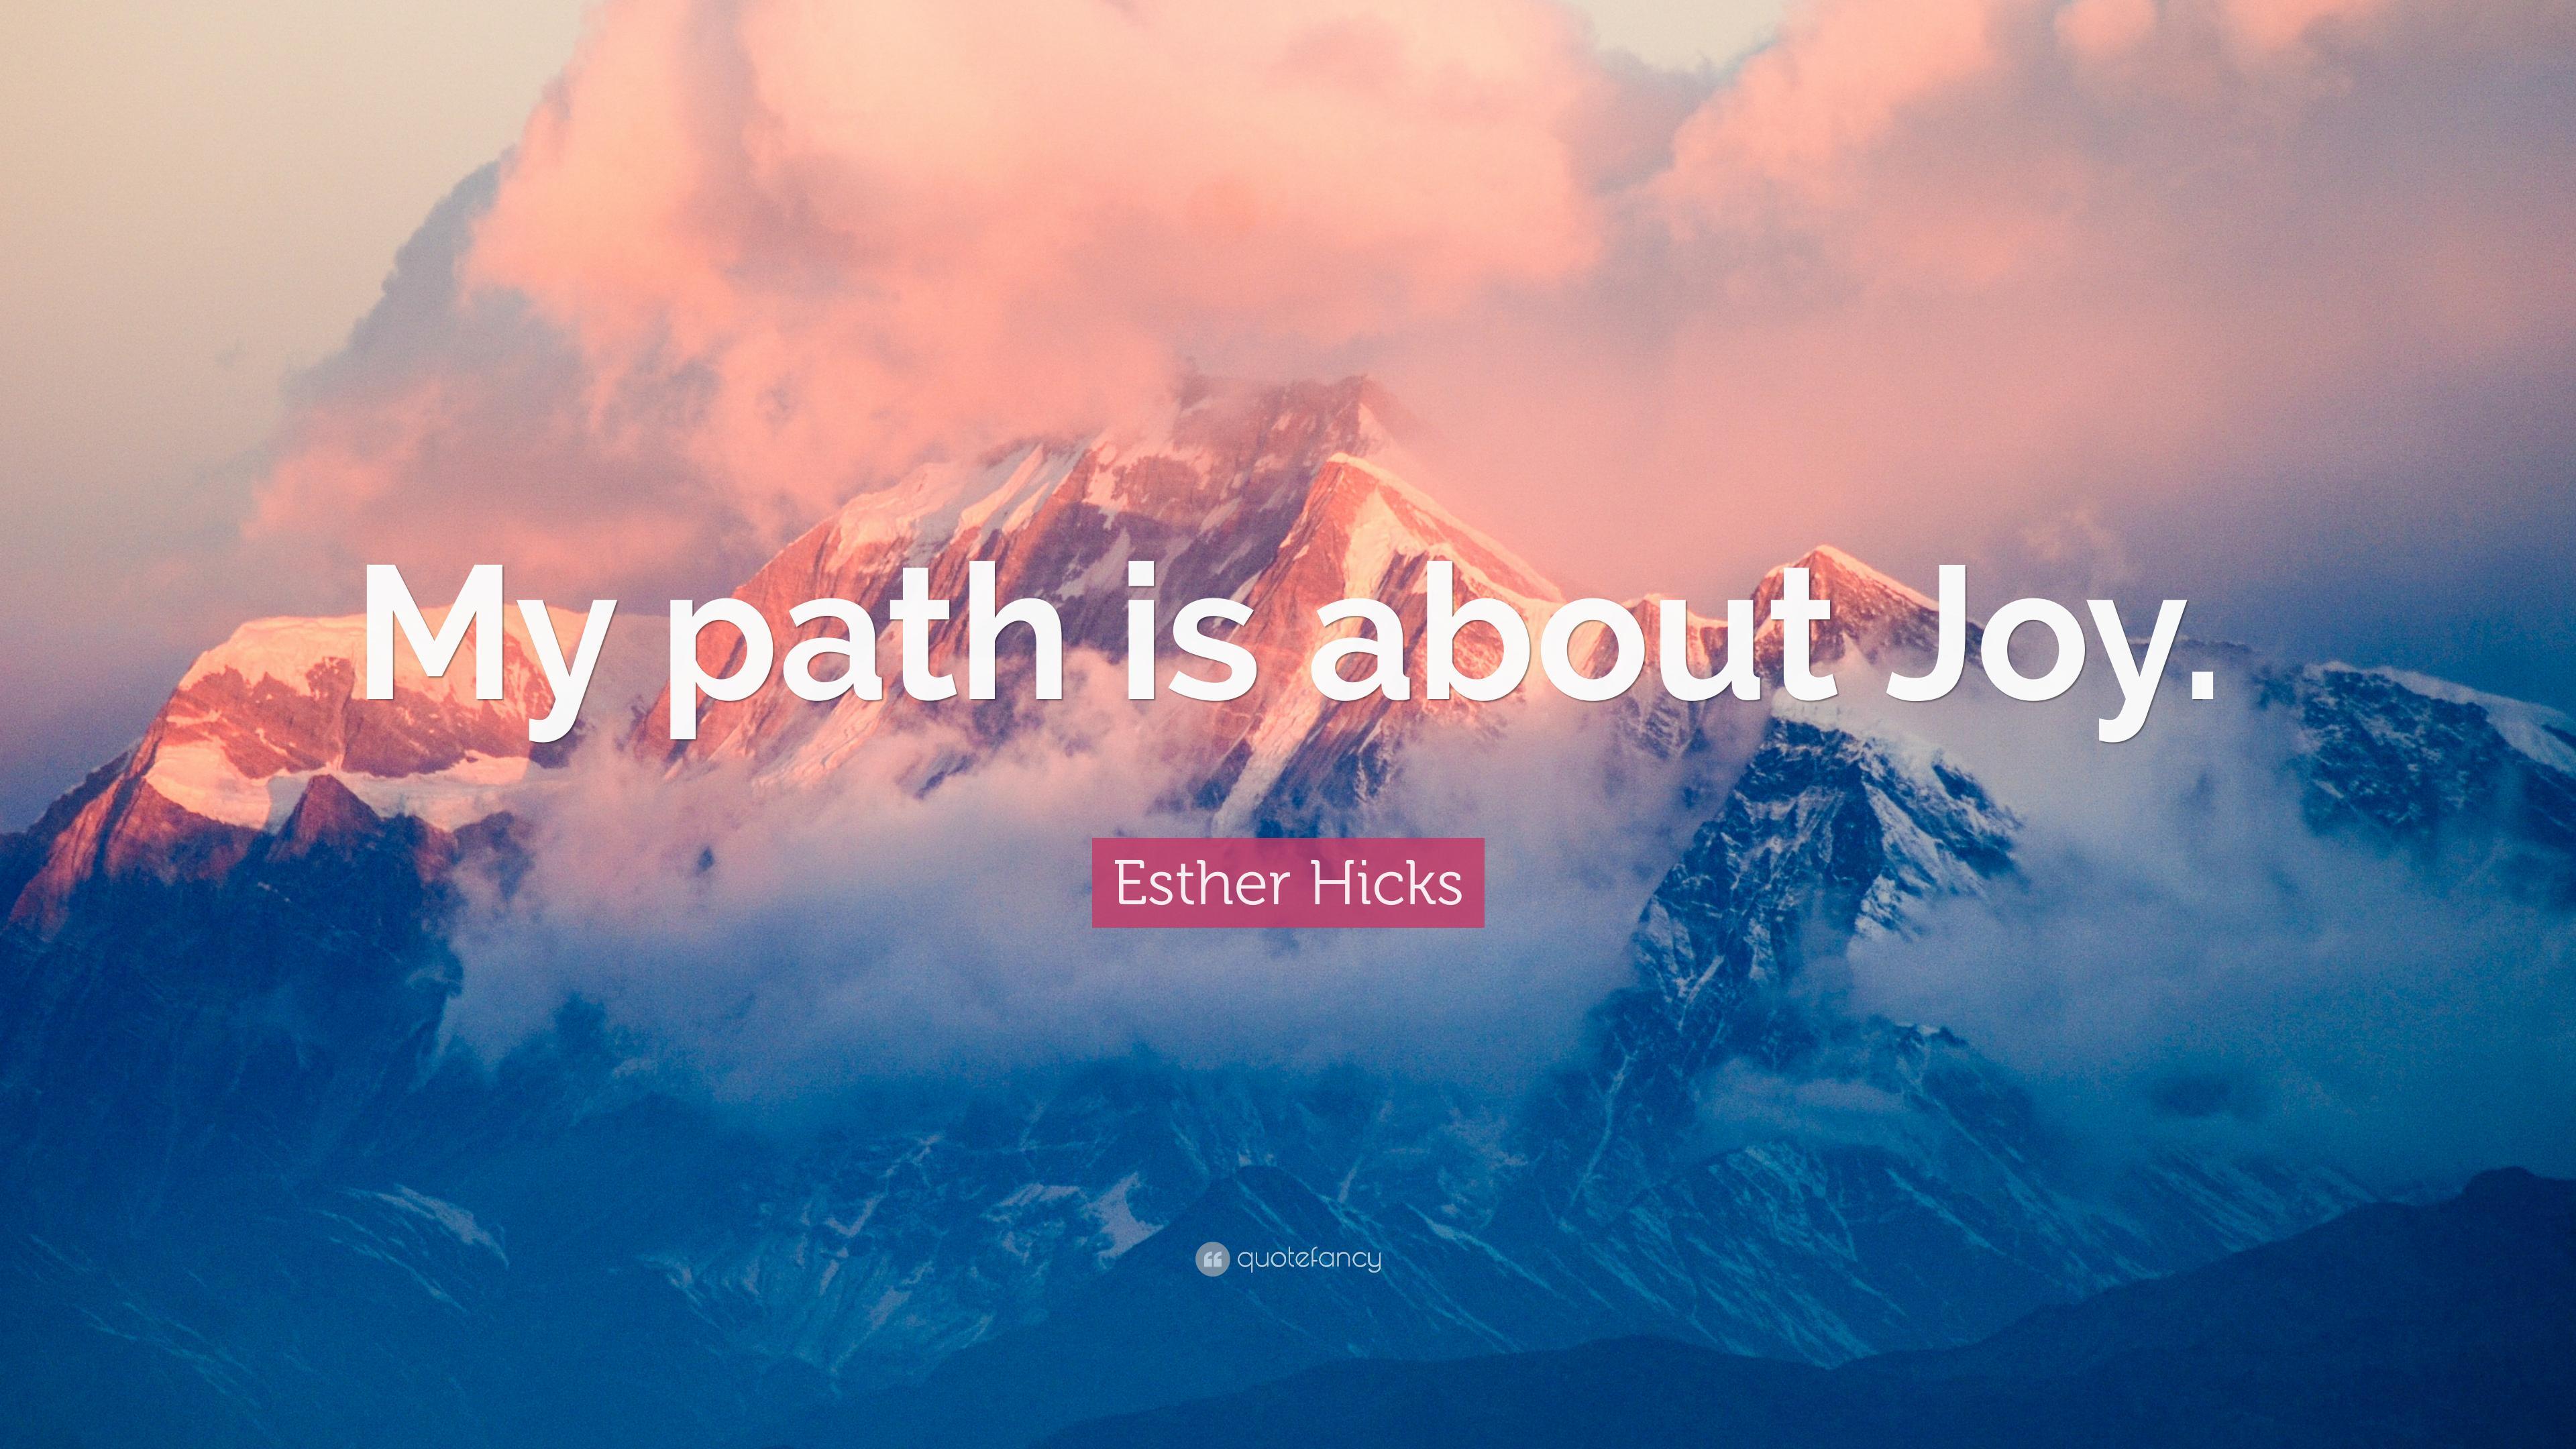 Esther Hicks Quote: “My path is about Joy.” (12 wallpaper)